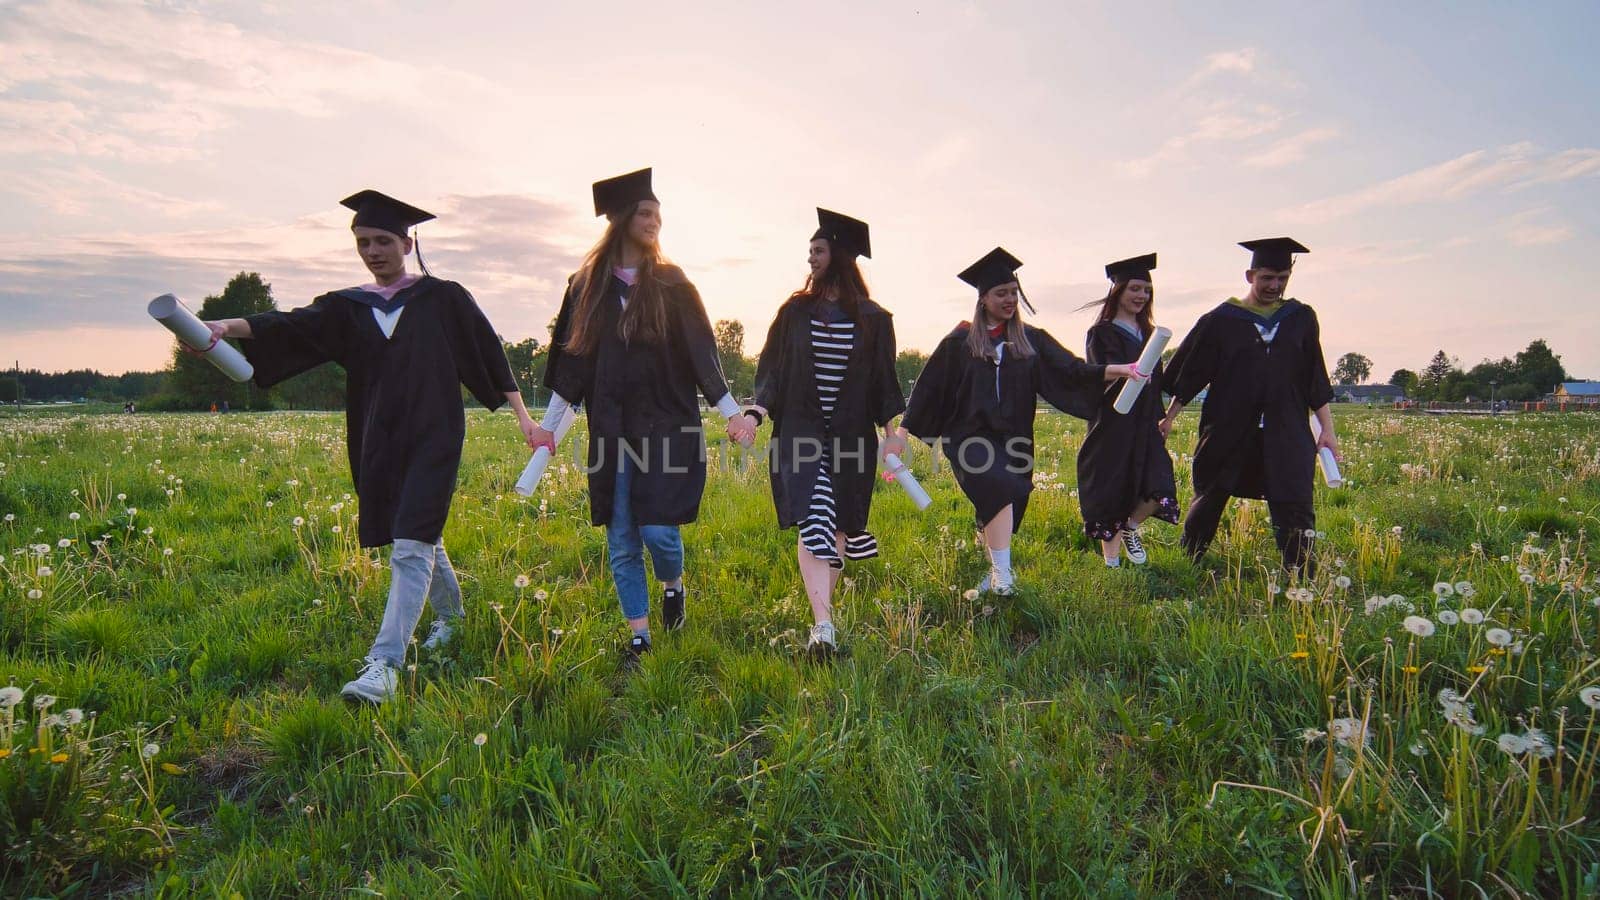 Six graduates in robes walk against the backdrop of the sunset